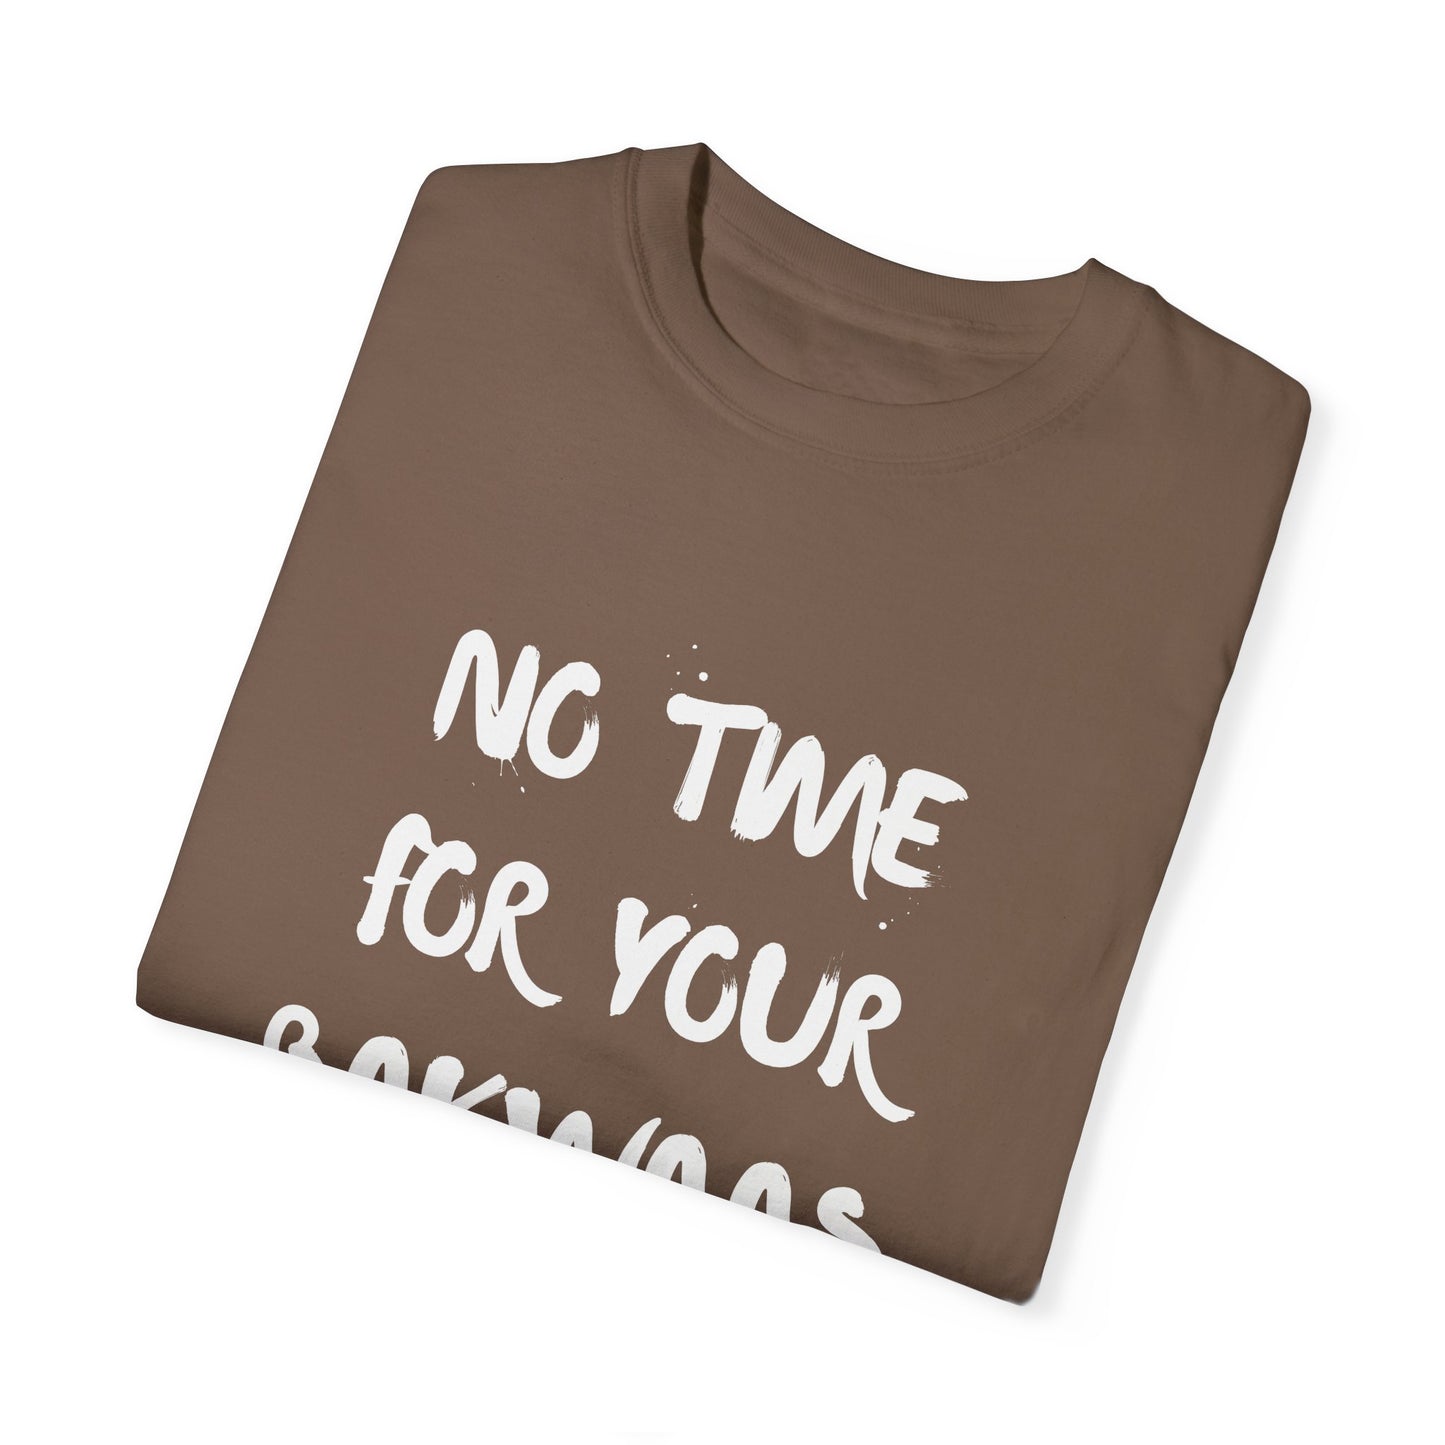 No Time For Your Bakwaas T-Shirt